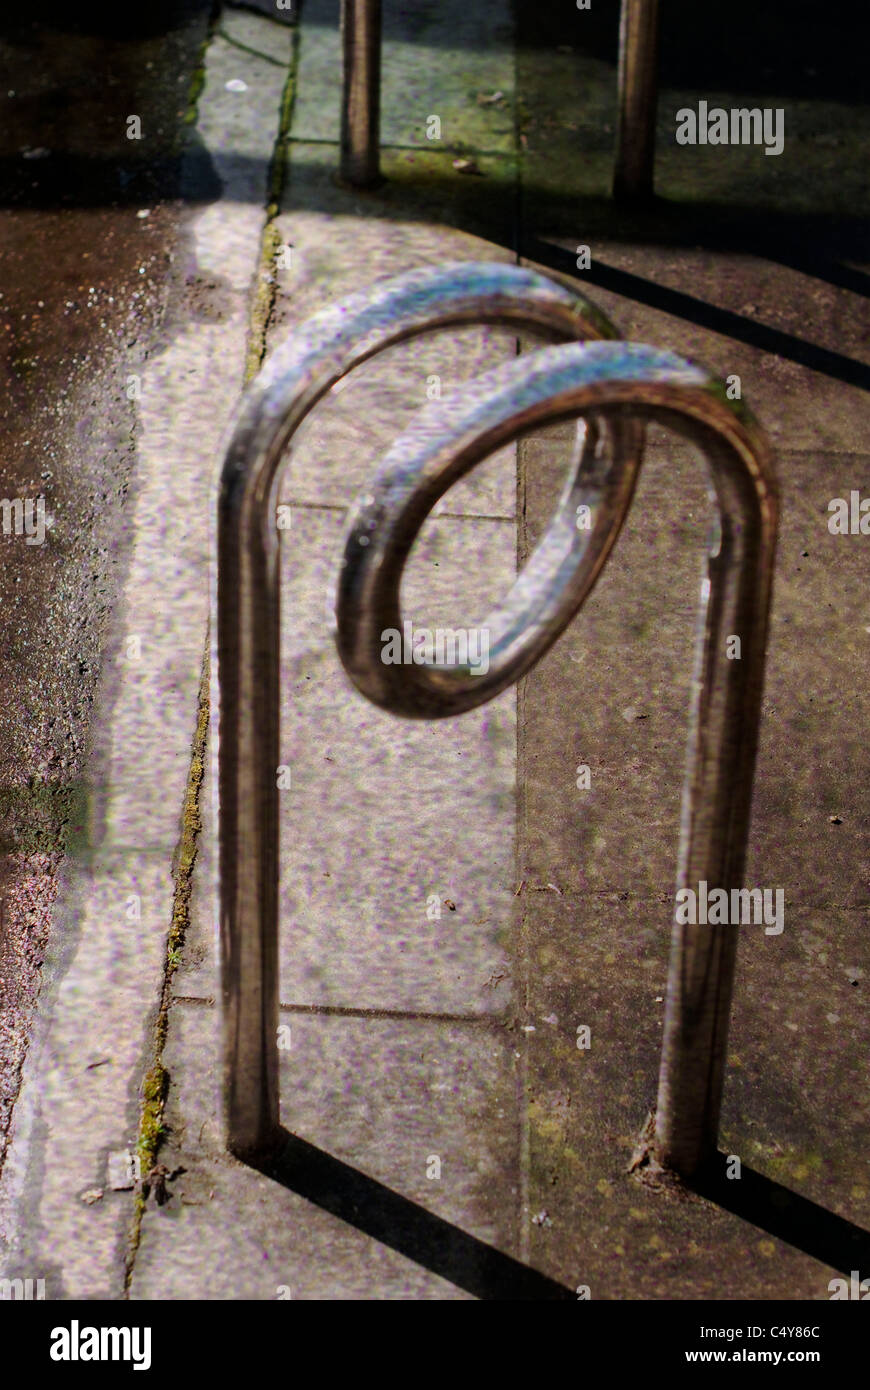 a grungy looking image of a curly metal bicycle stand Stock Photo